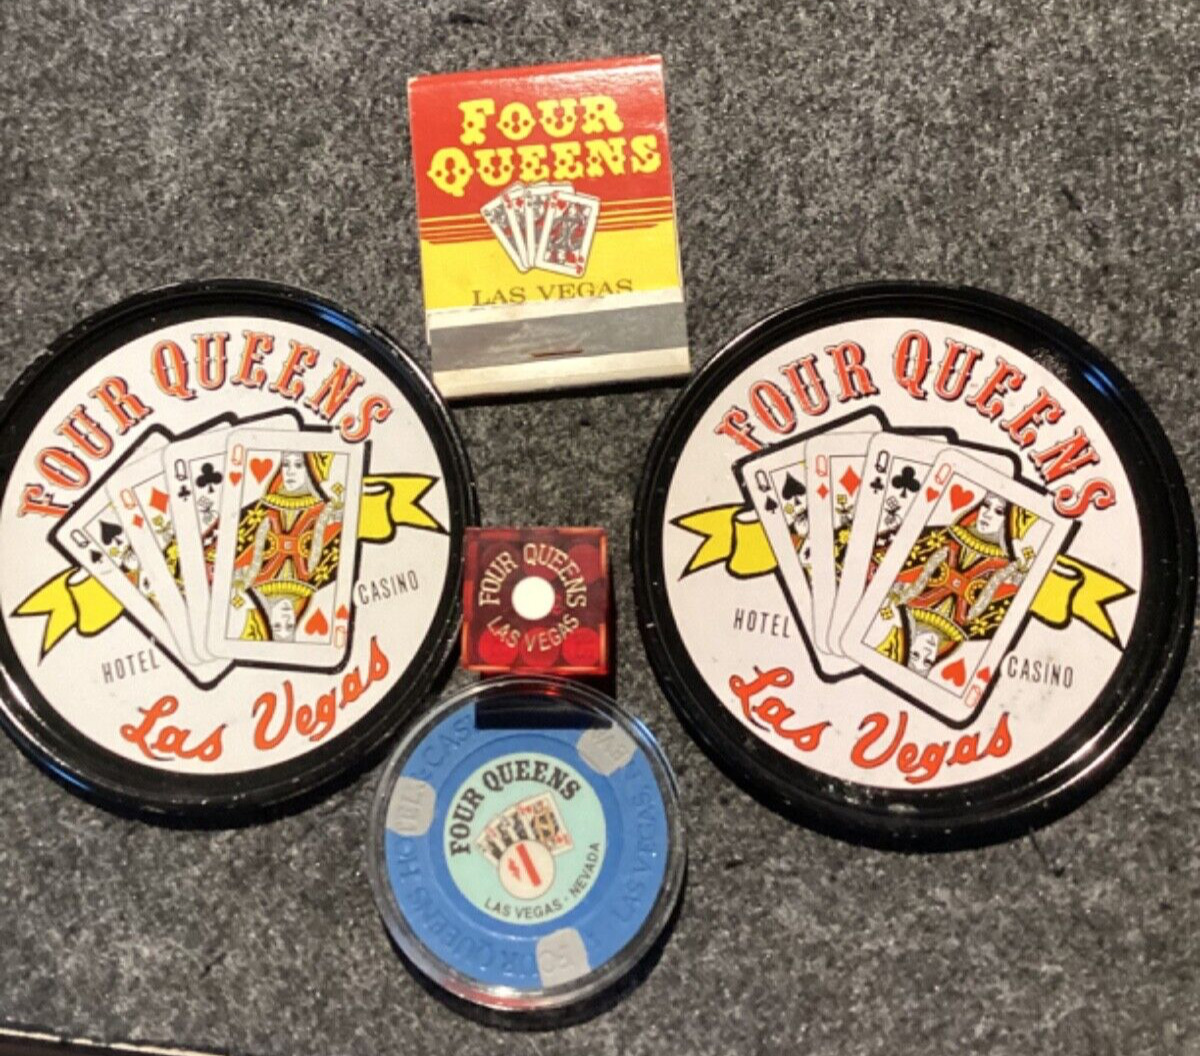 Four Queens Rare Chip, di , matchbook and coasters